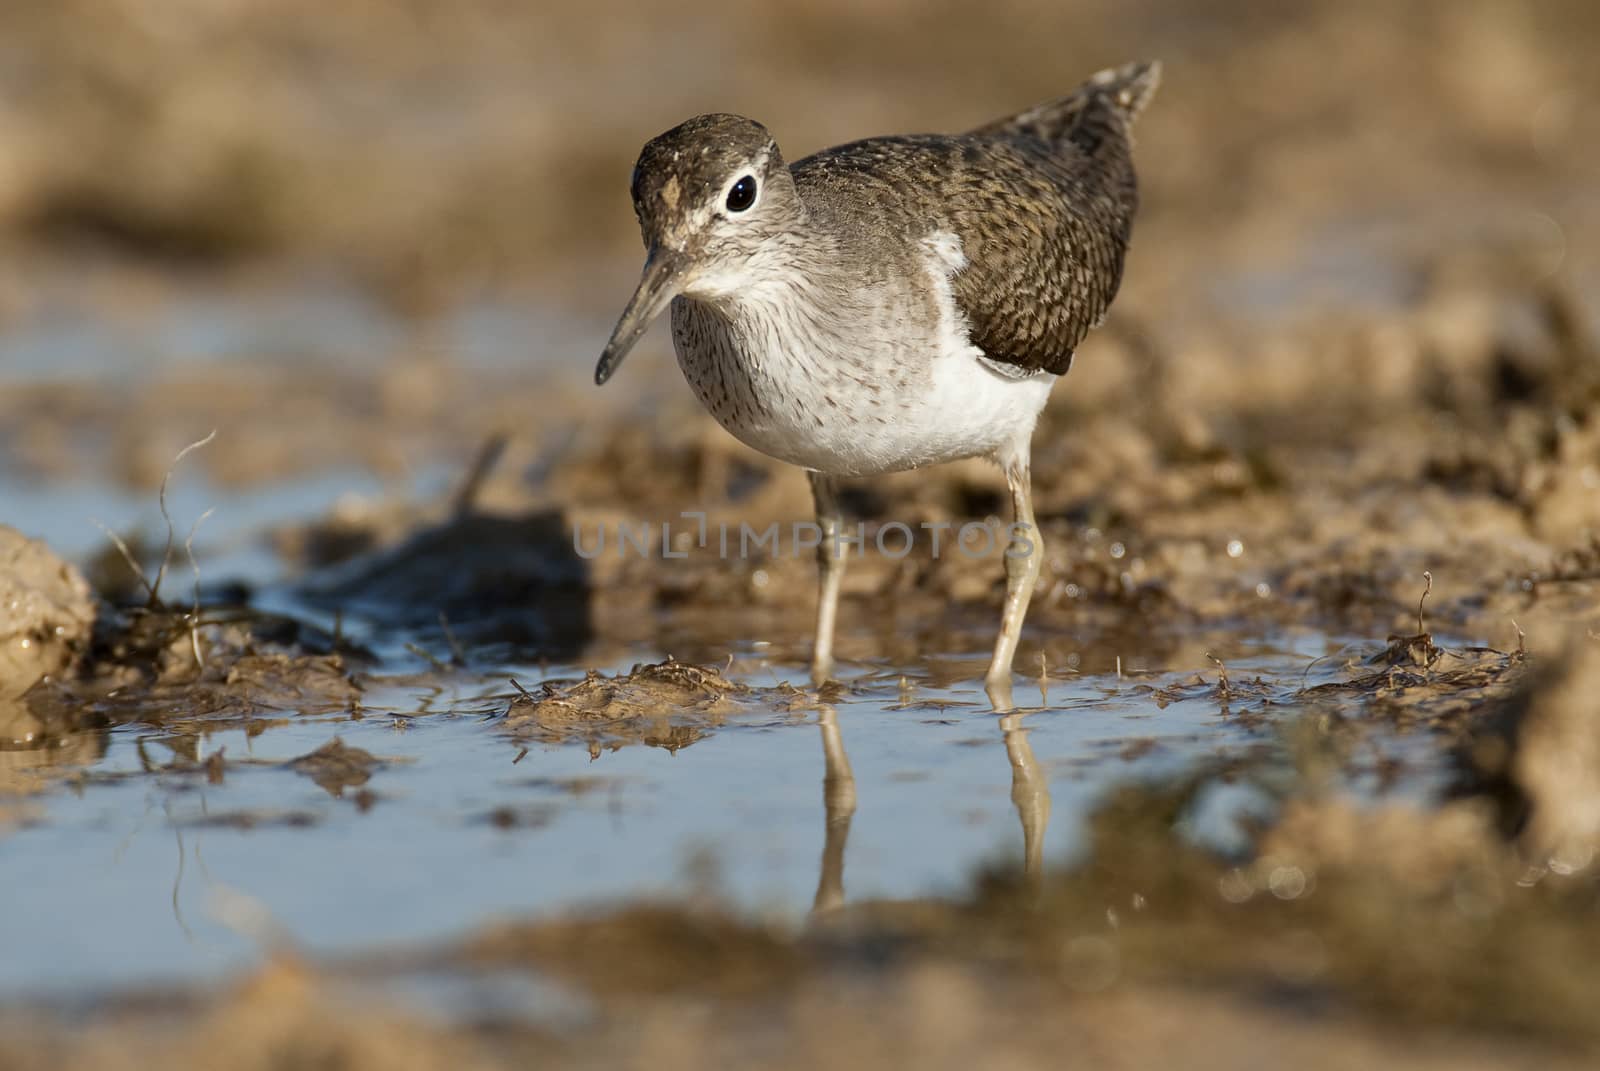 Common sandpiper - Actitis hypoleucos Looking for food in the wa by jalonsohu@gmail.com